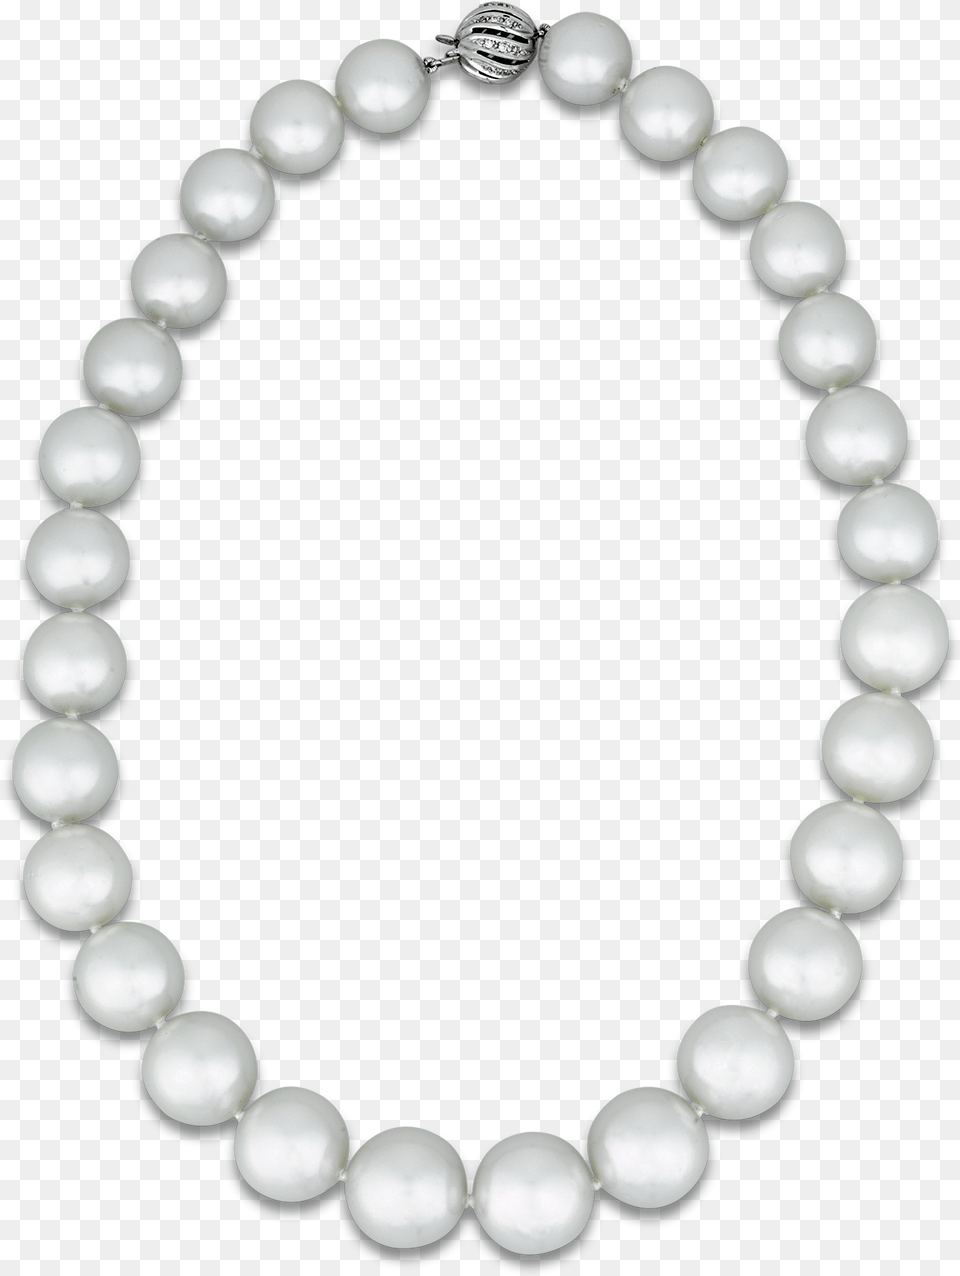 White South Sea Pearl Necklace Disney Princess Frames, Accessories, Jewelry Free Png Download